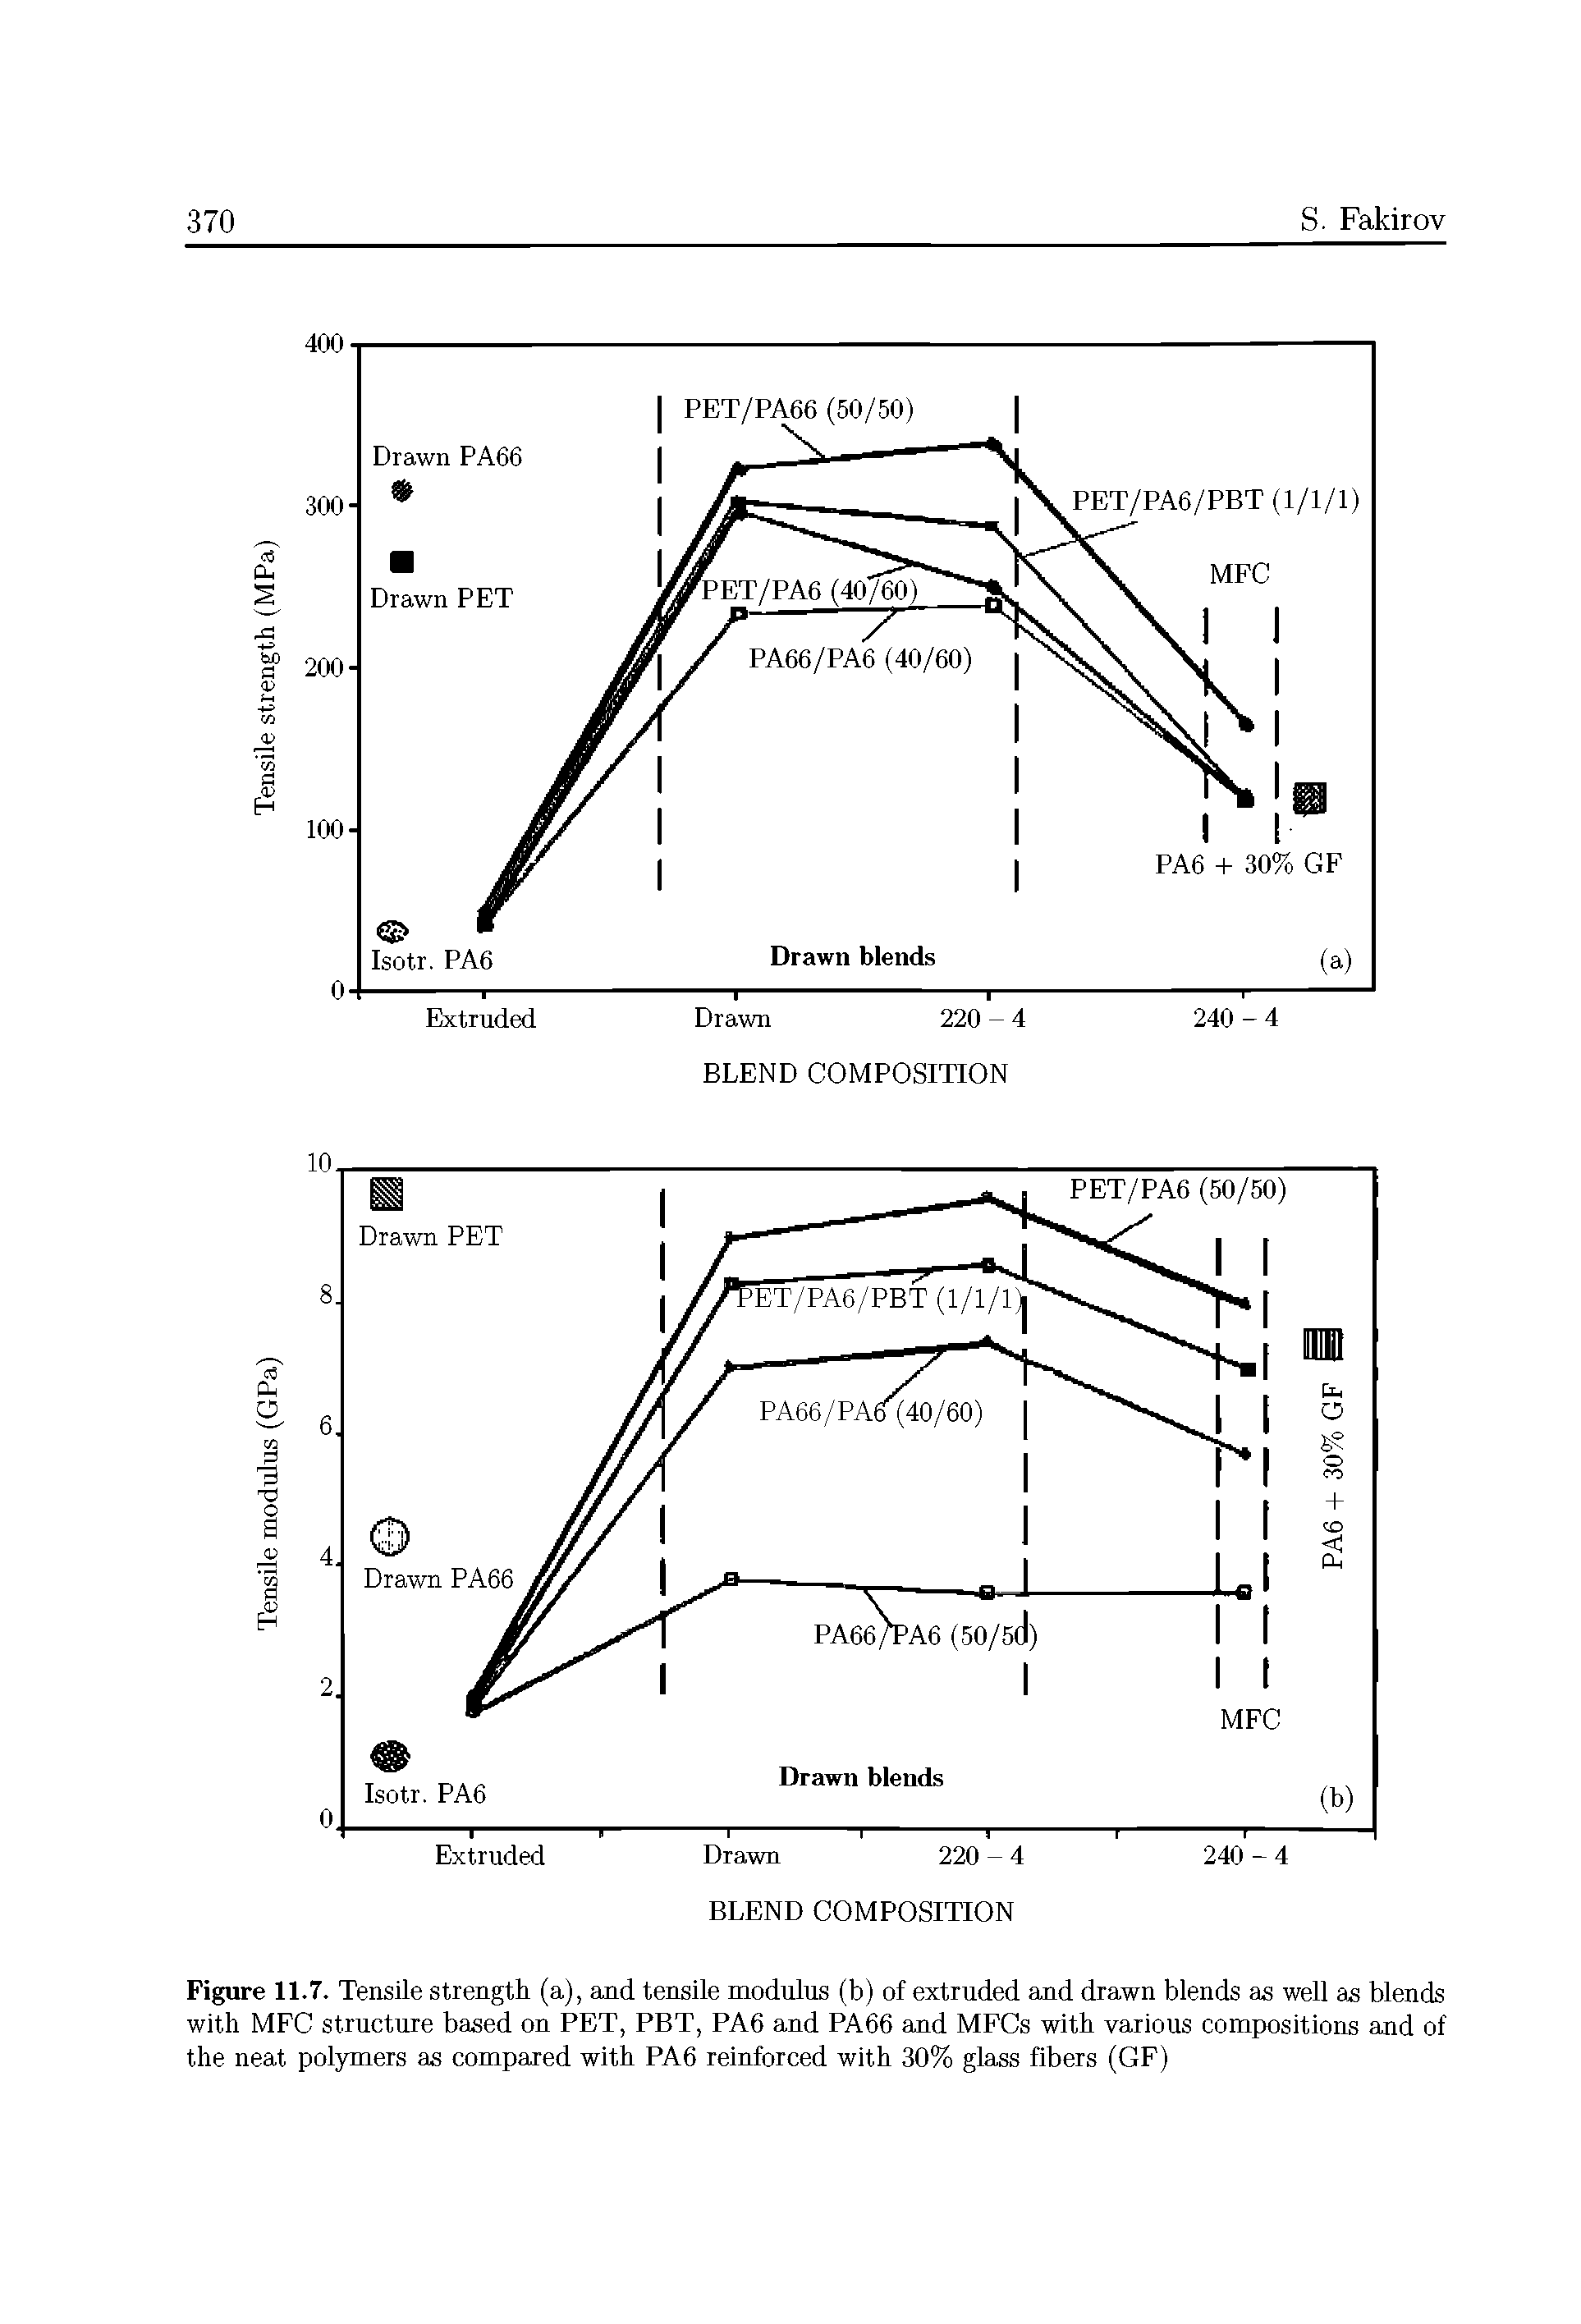 Figure 11.7. Tensile strength (a), and tensile modulus (b) of extruded and drawn blends as well as blends with MFC structure based on PET, PBT, PA6 and PA66 and MFCs with various compositions and of the neat polymers as compared with PA6 reinforced with 30% glass fibers (GF)...